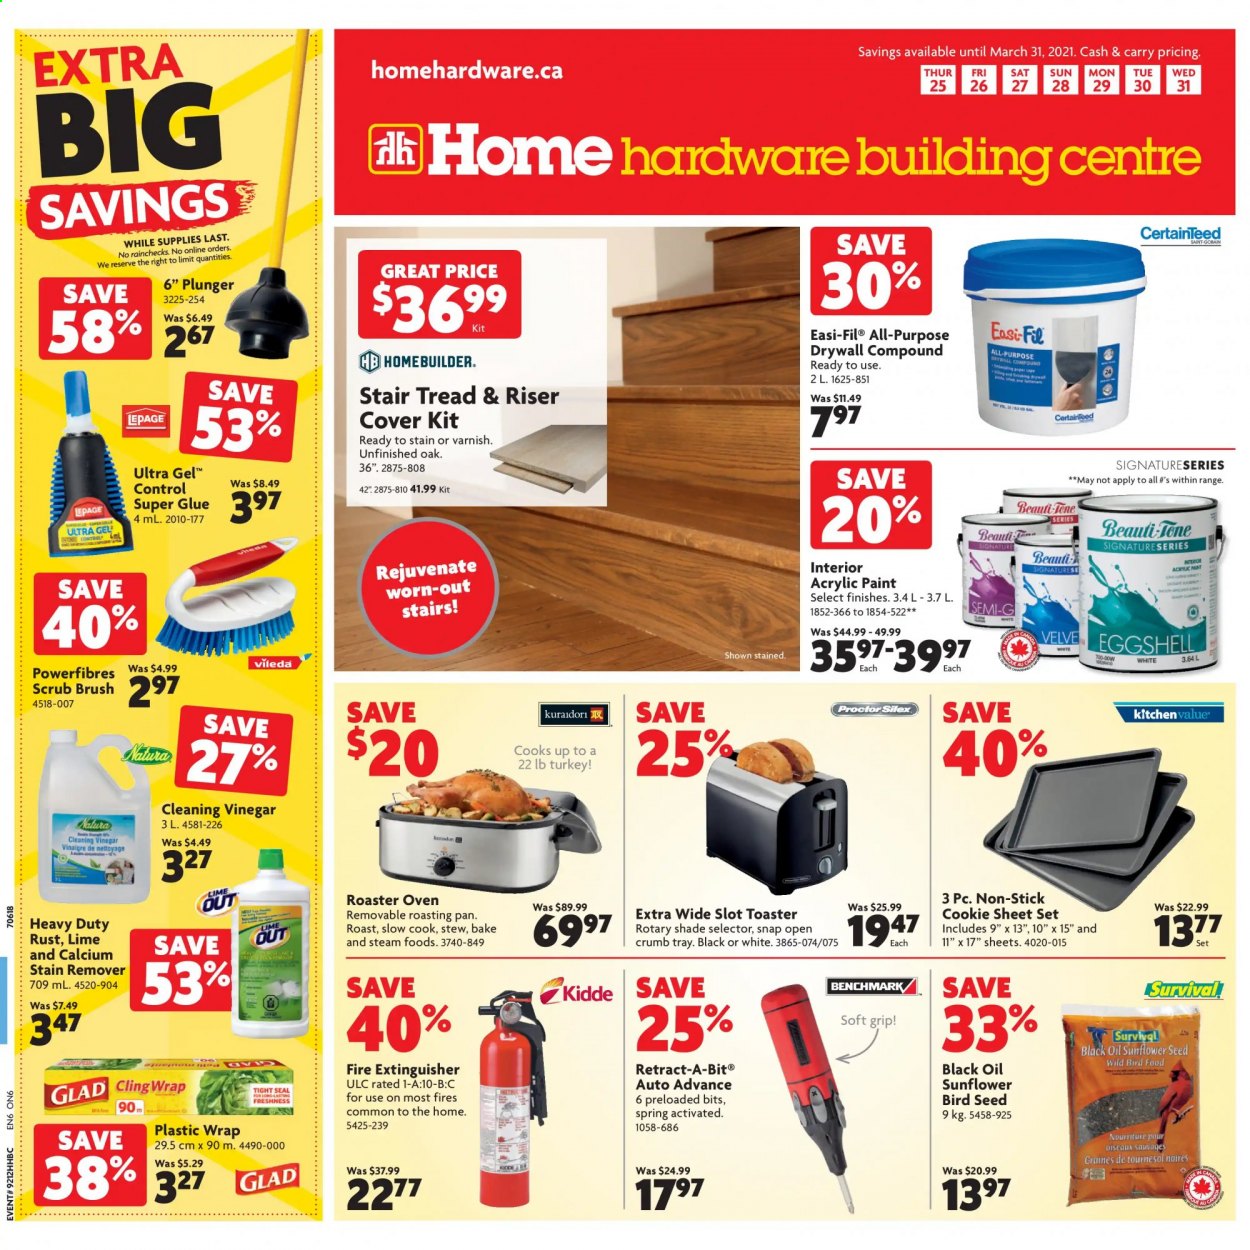 thumbnail - Home Hardware Building Centre Flyer - March 25, 2021 - March 31, 2021 - Sales products - stain remover, Rejuvenate, roaster, Vileda, glue, paint, plant seeds, extinguisher, toaster. Page 1.